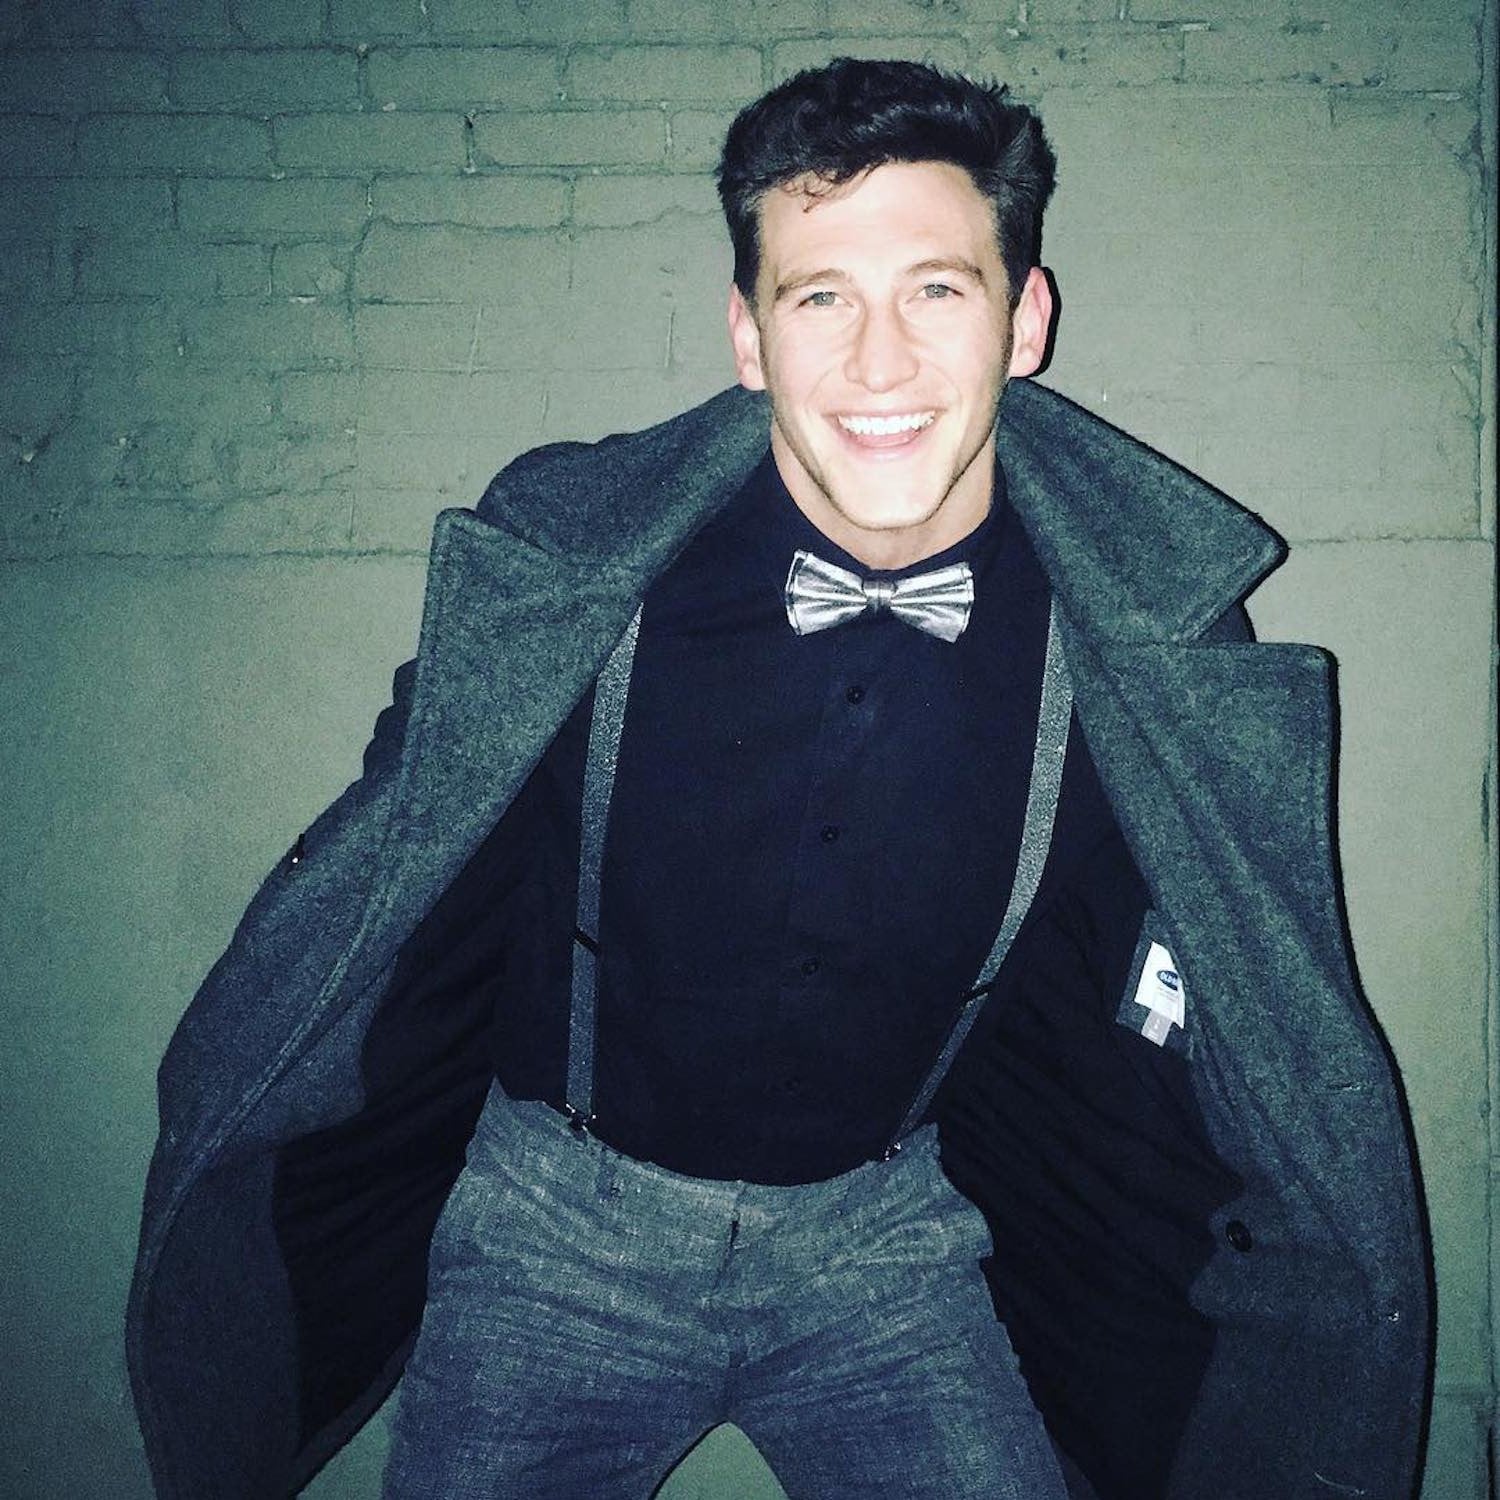 the bachelorette cast on twitter and instagram 2018 - young bj instagram to follow